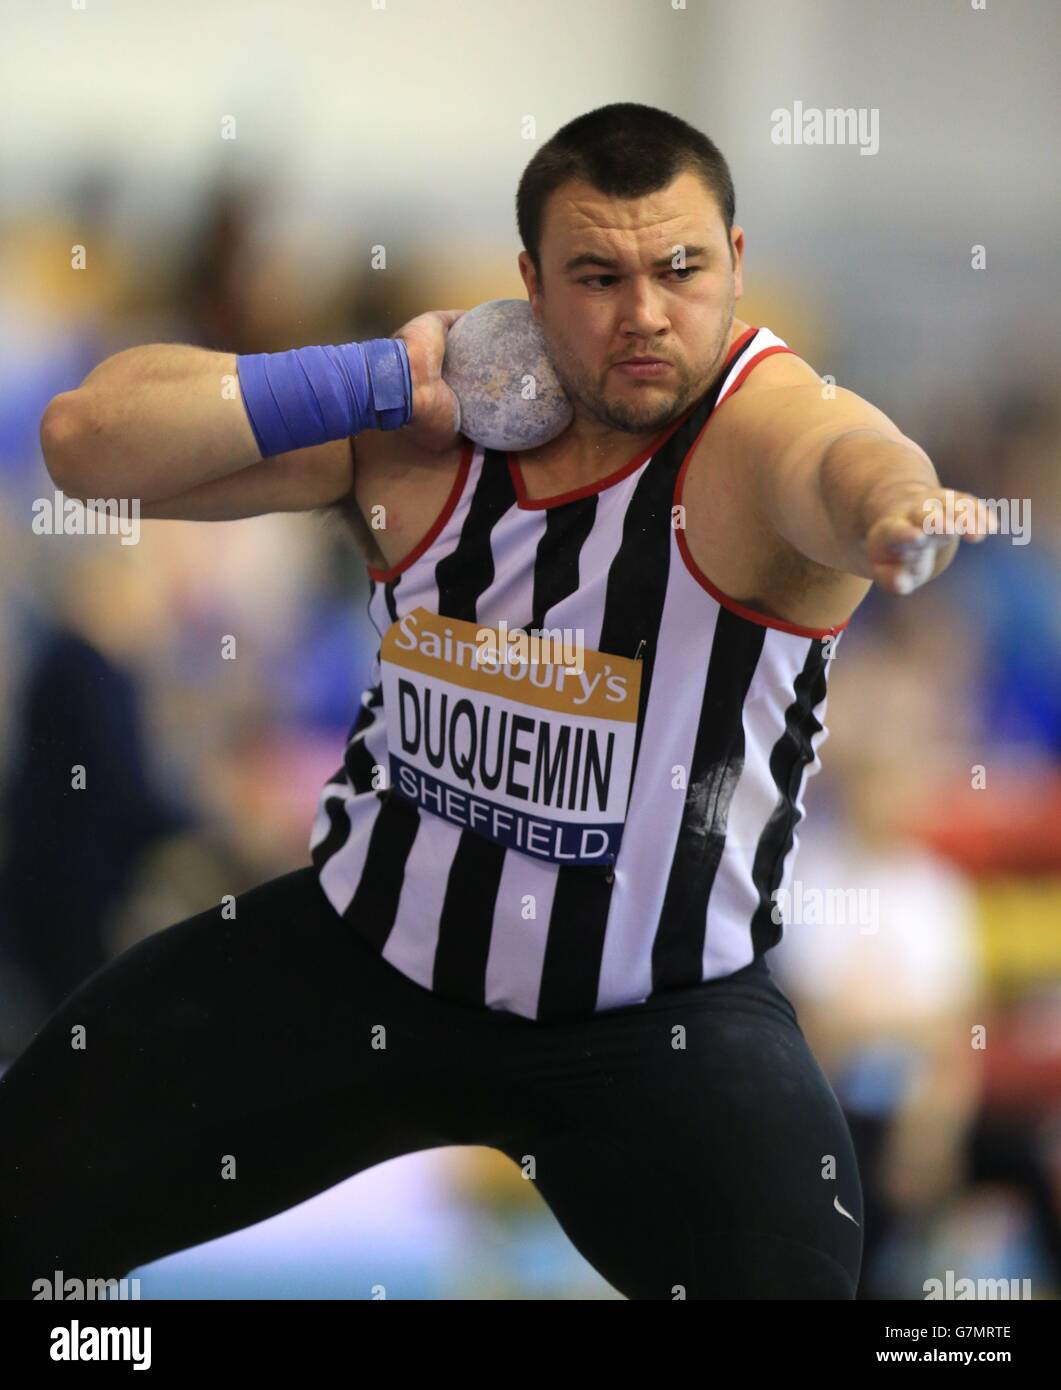 Zane Duquemin on his way to winning the mens shot putt final during day two of the Sainsbury's British Indoor Championships at the English Institute of Sport, Sheffield. Stock Photo